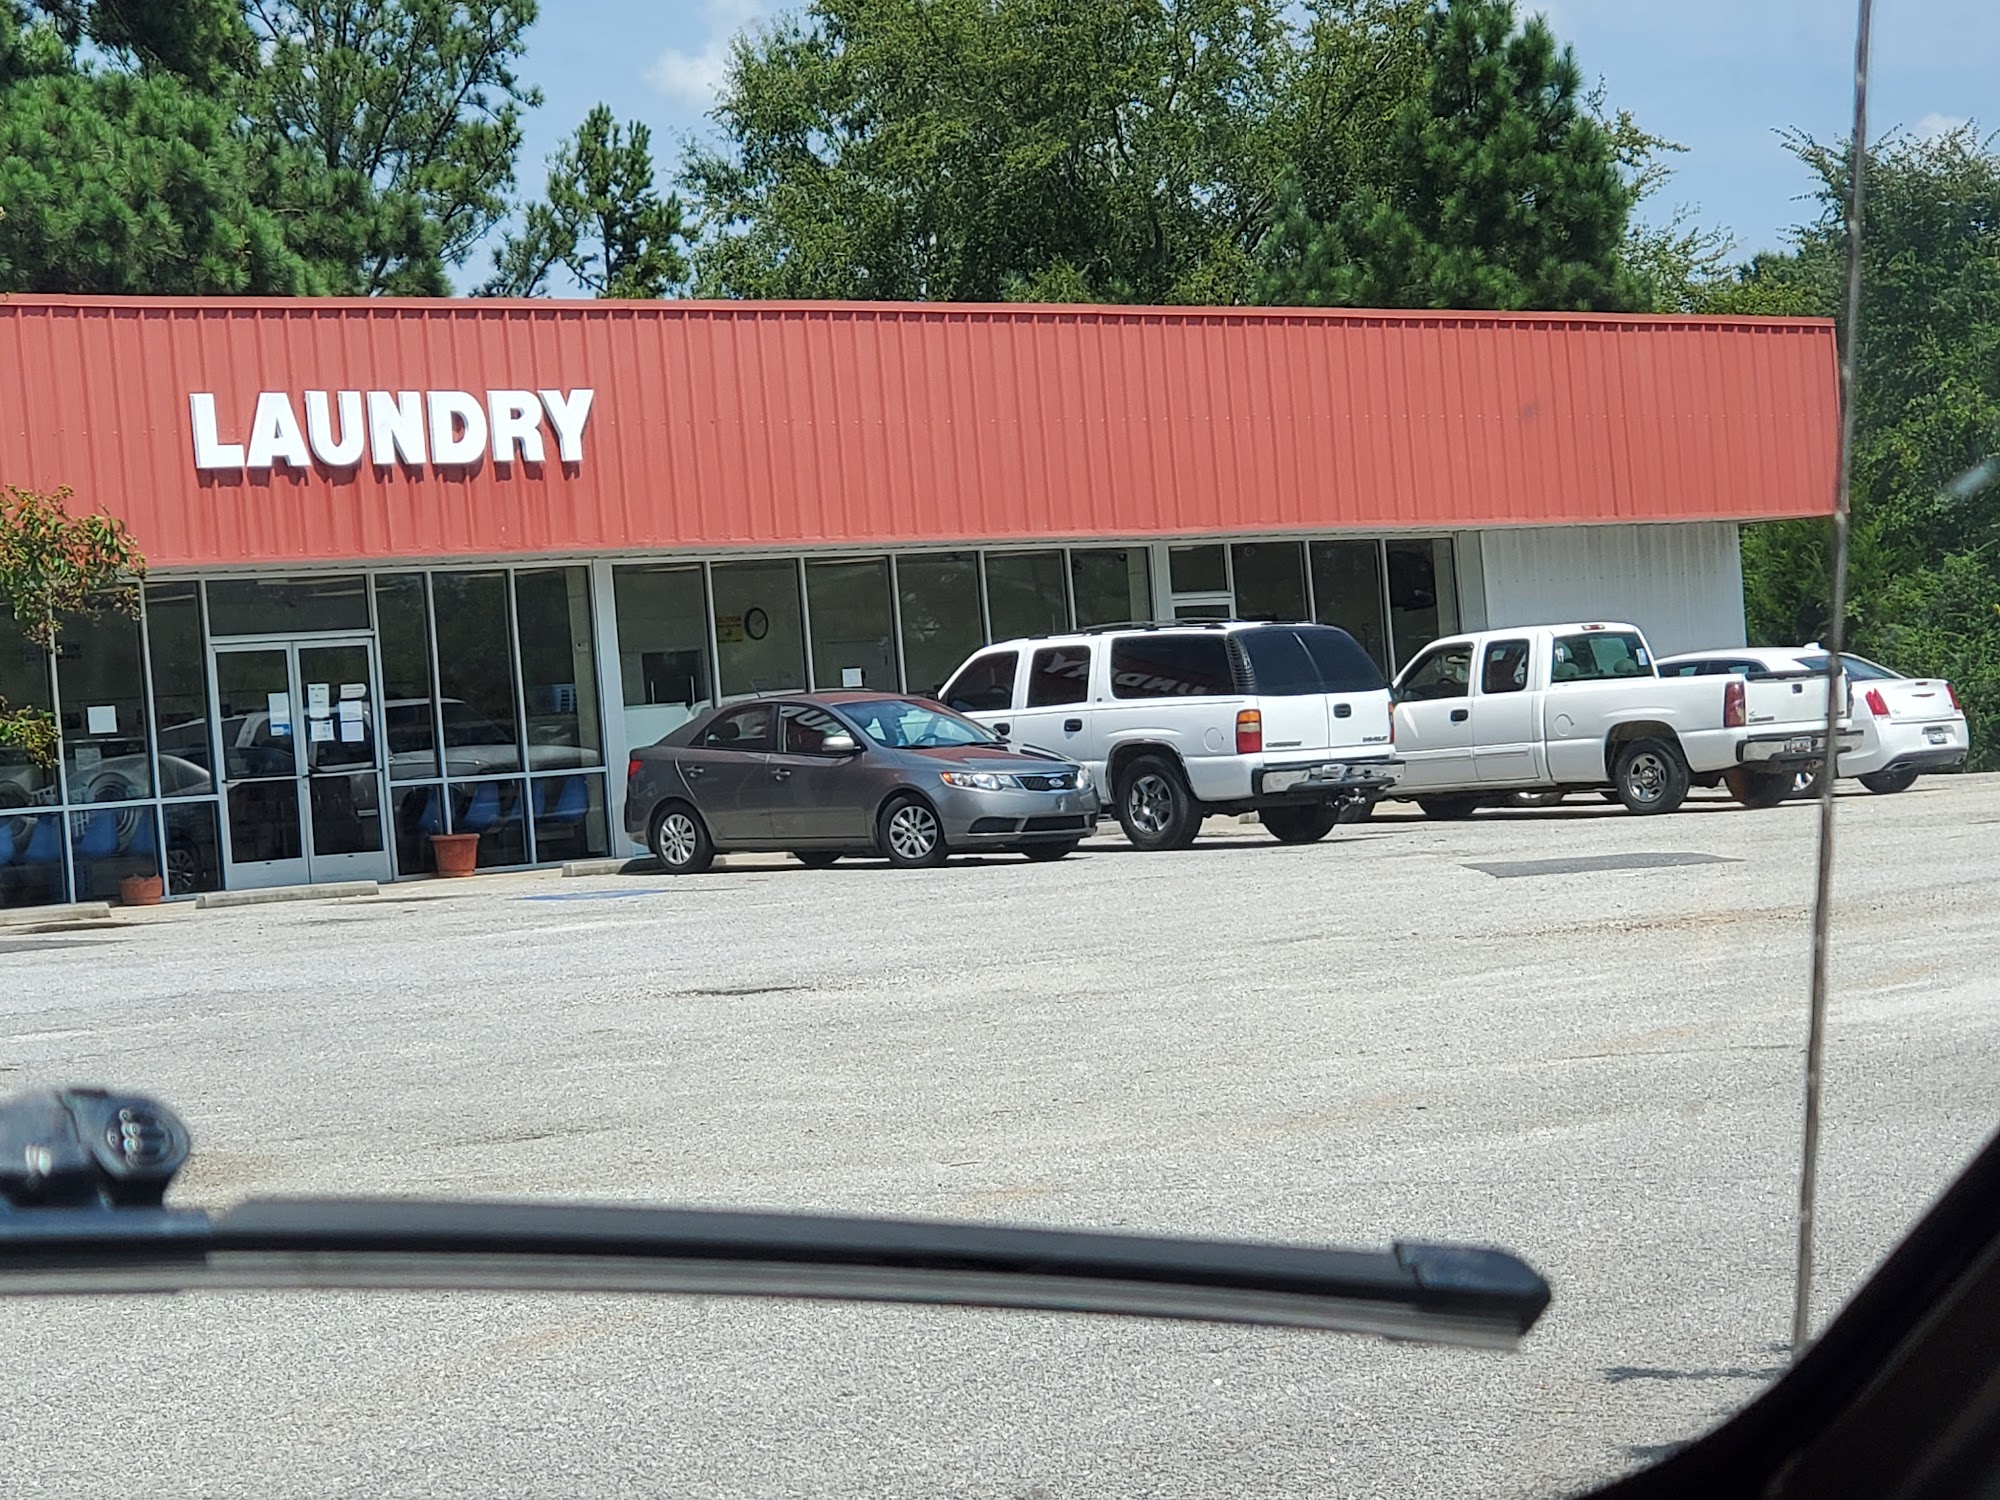 Chester Crown Center Laundry 606 State Rd 536, Chester South Carolina 29706